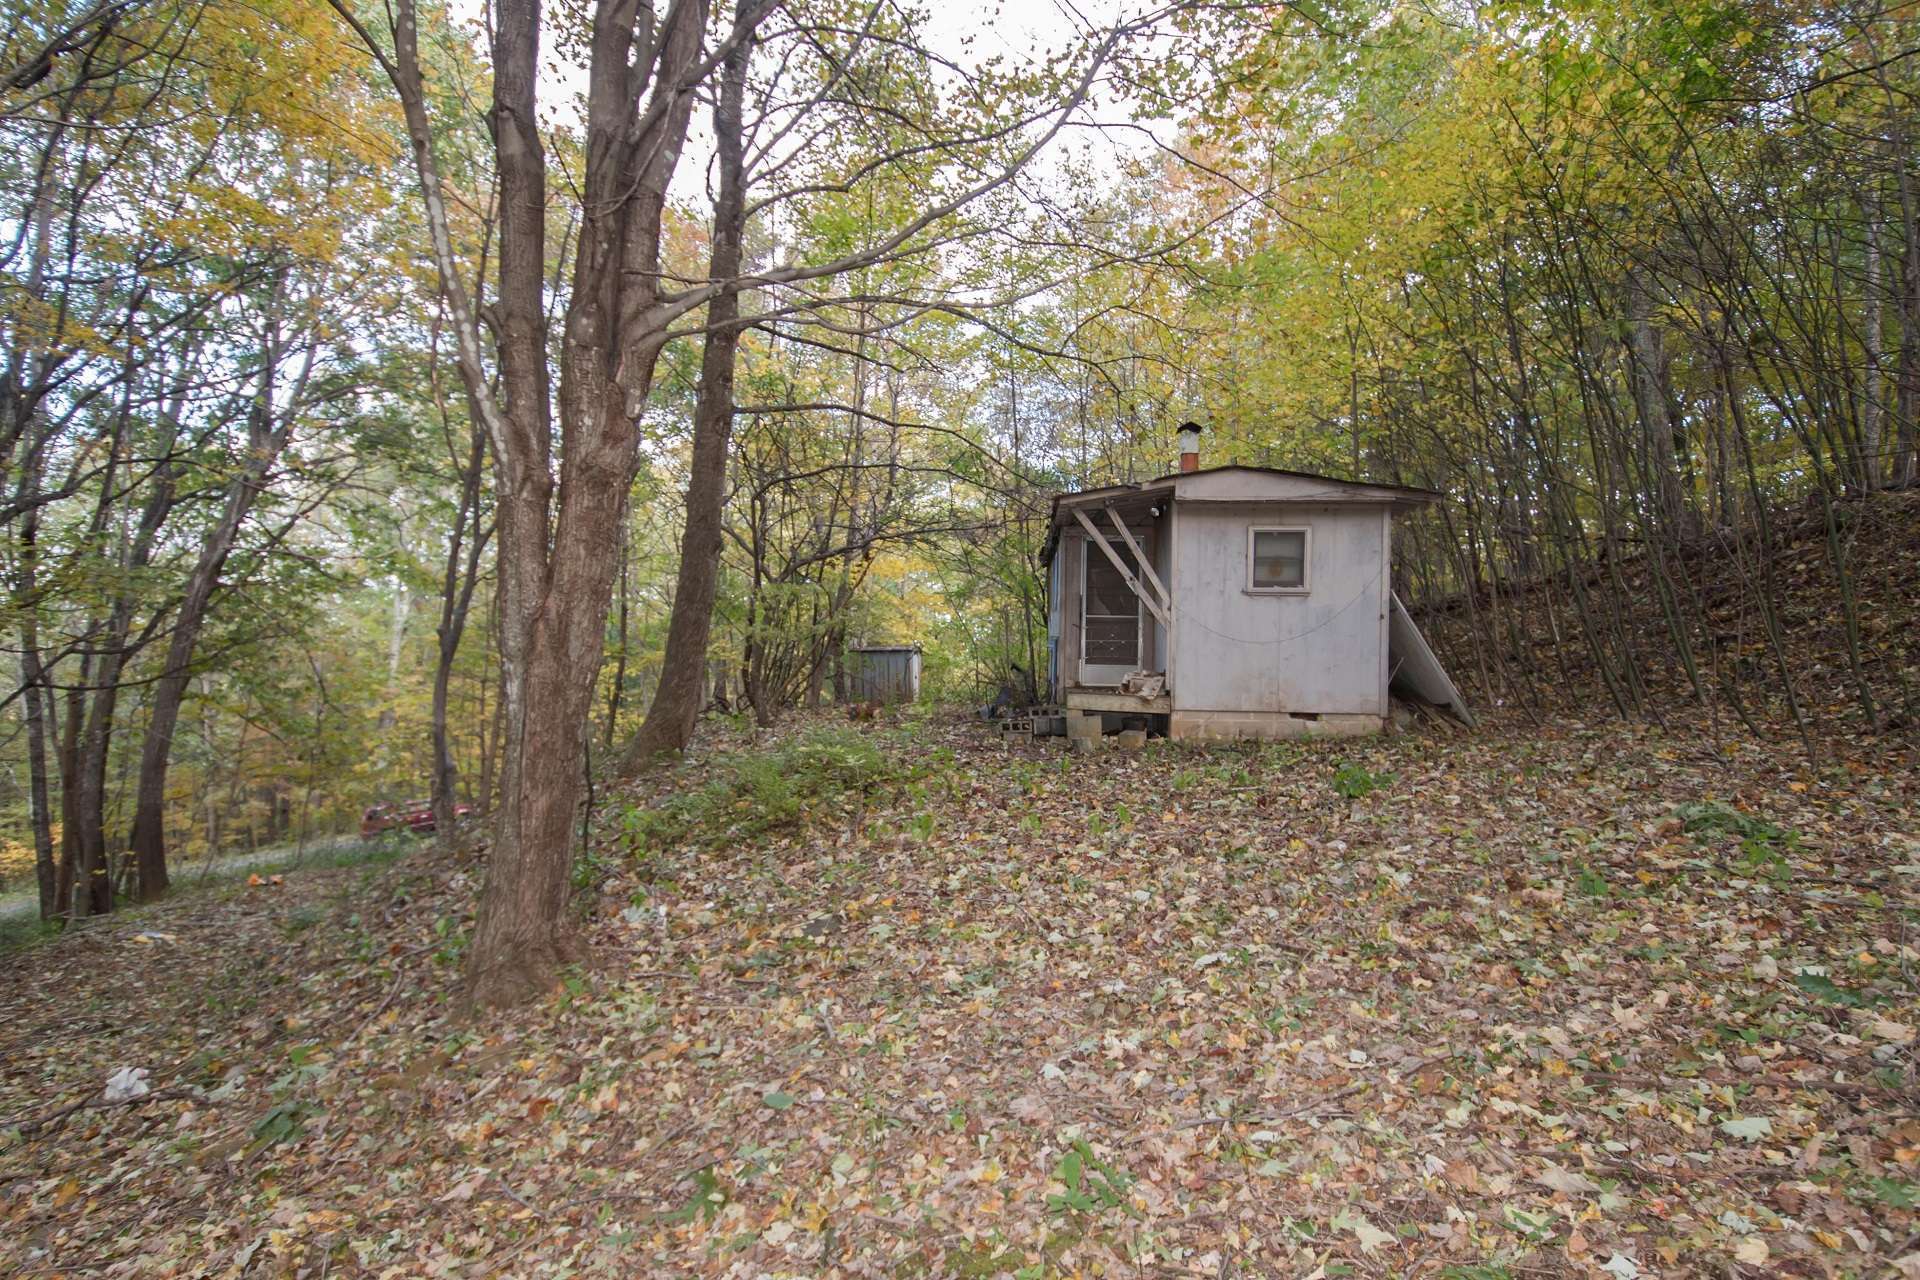 There is a small cabin/storage building located on the property.